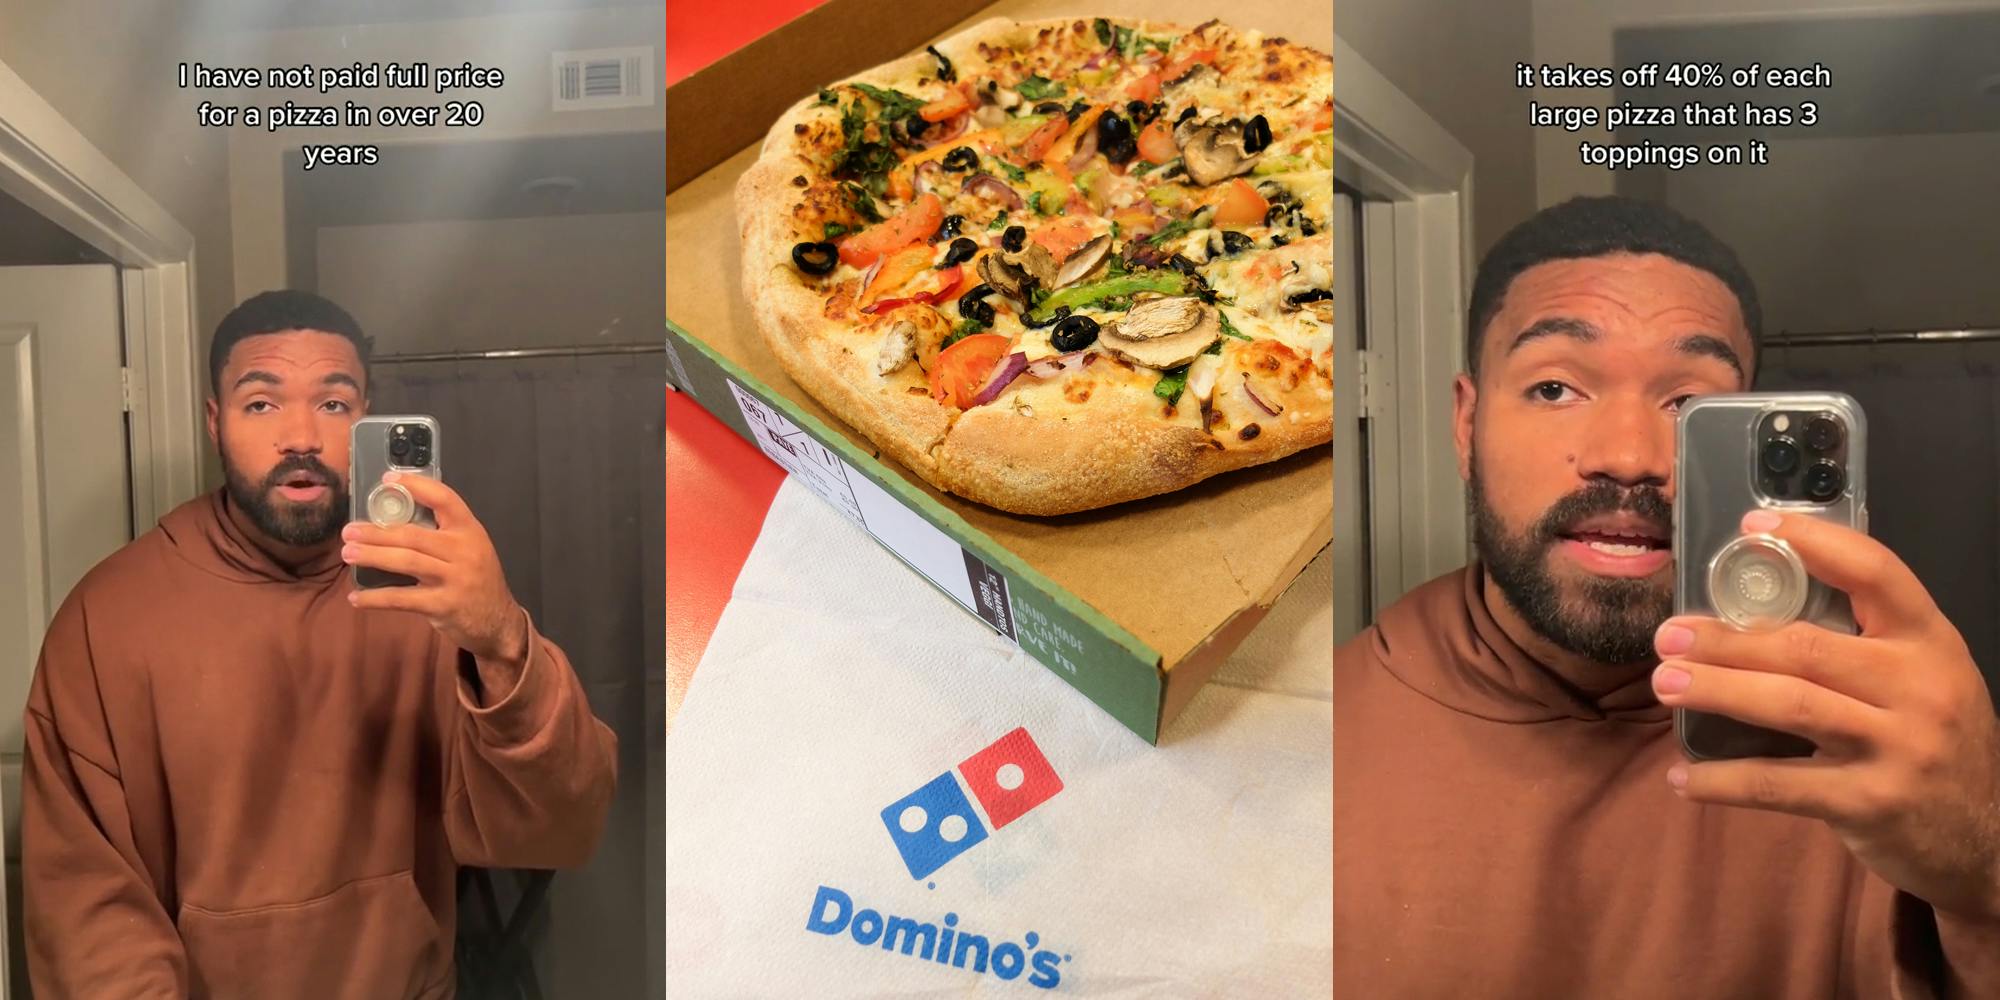 person speaking in bathroom mirror with caption "I have not paid full price for a pizza in over 20 years" (l) Domino's pizza in box with branded napkin in front (c) person speaking in bathroom mirror with caption "it takes off 40% of each large pizza that has 3 toppings on it" (r)